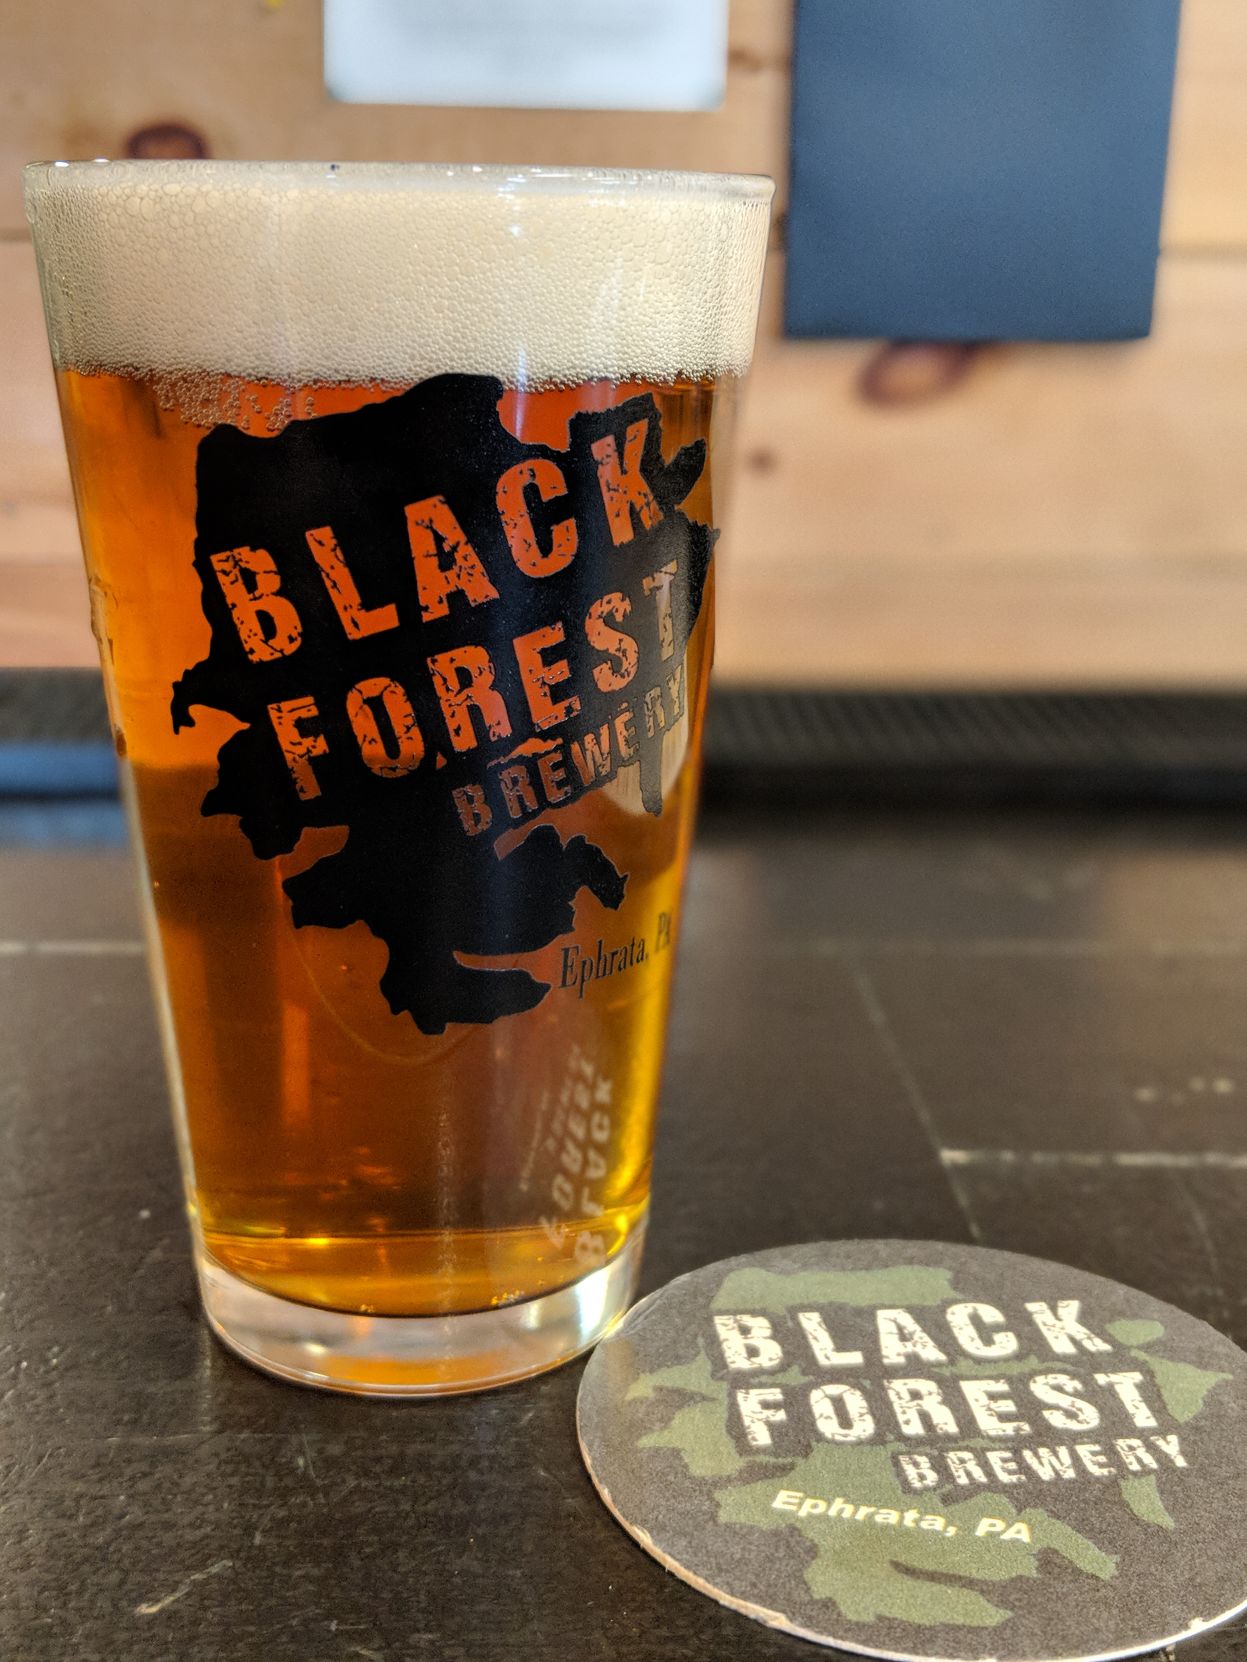 .black forest brewery